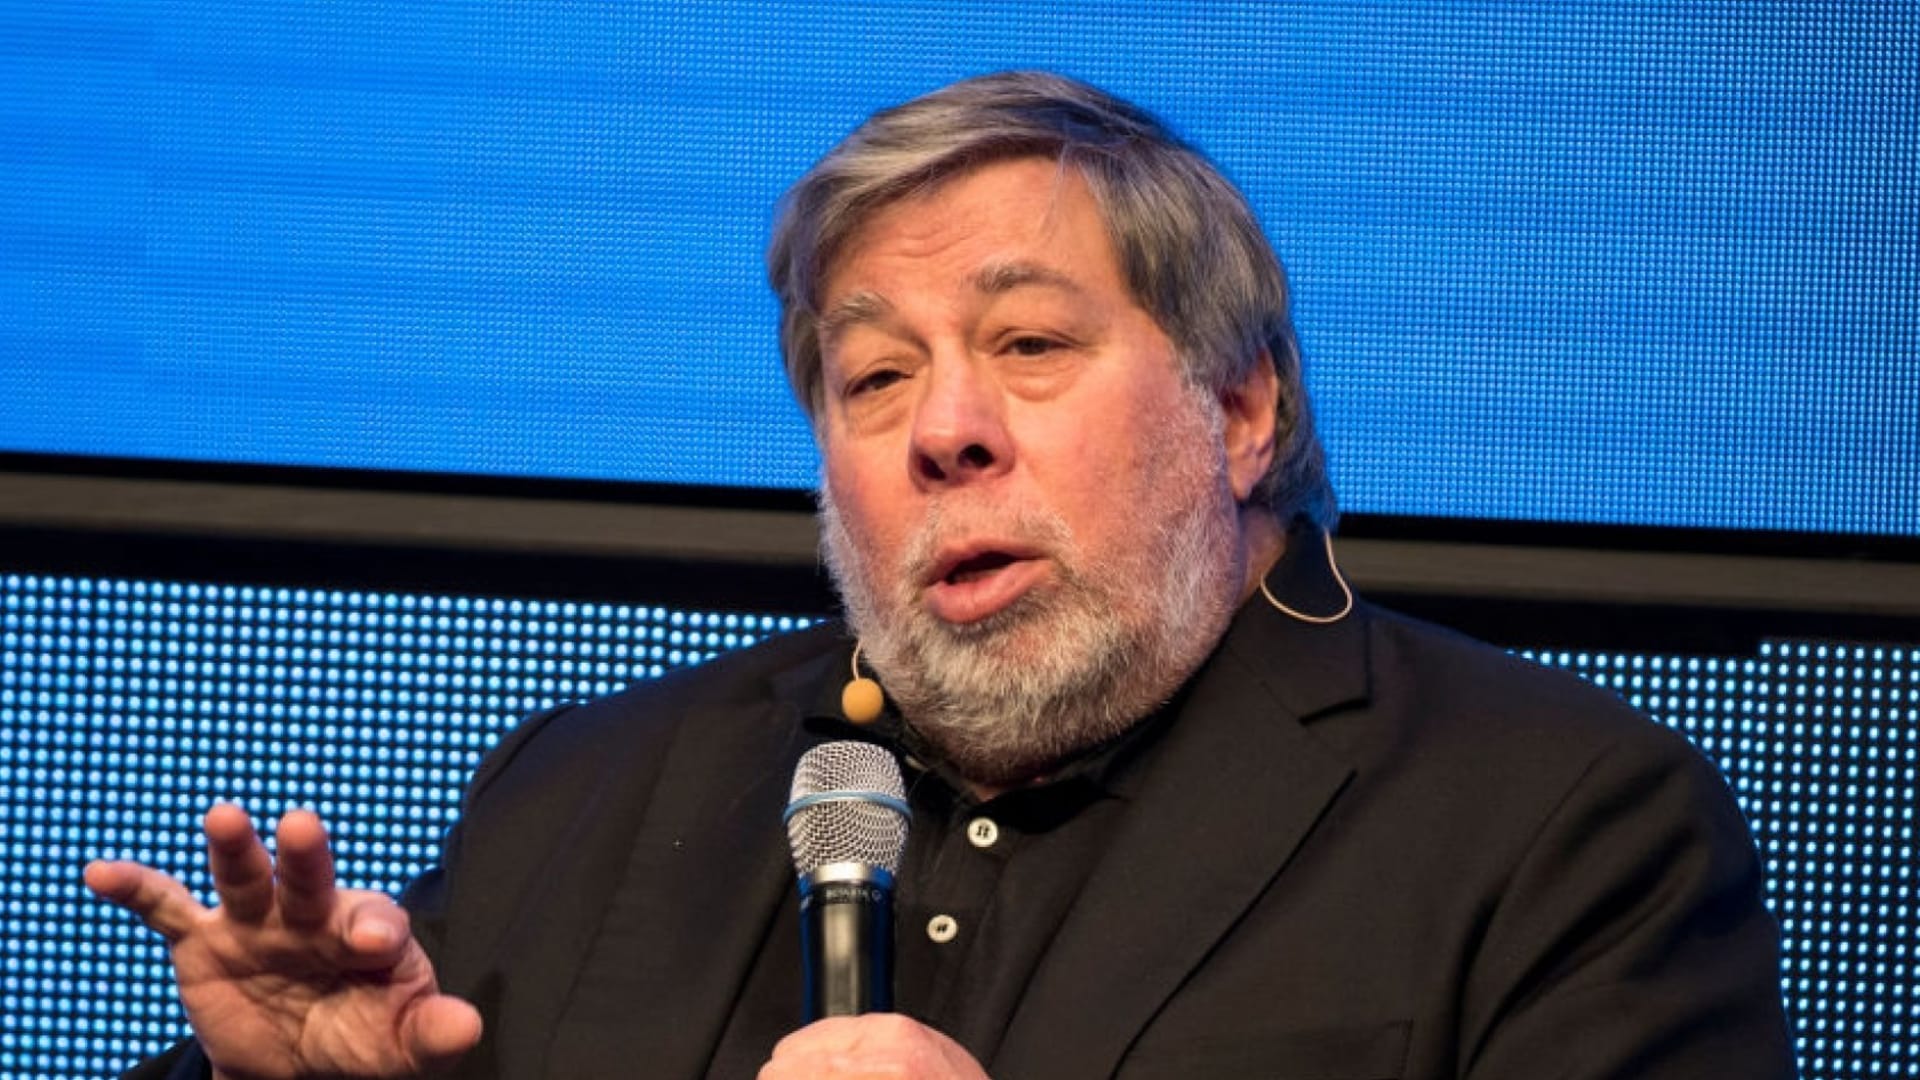 Apple's Co-Founder Has Harsh Words for the Company Over Its Control of Your Devices